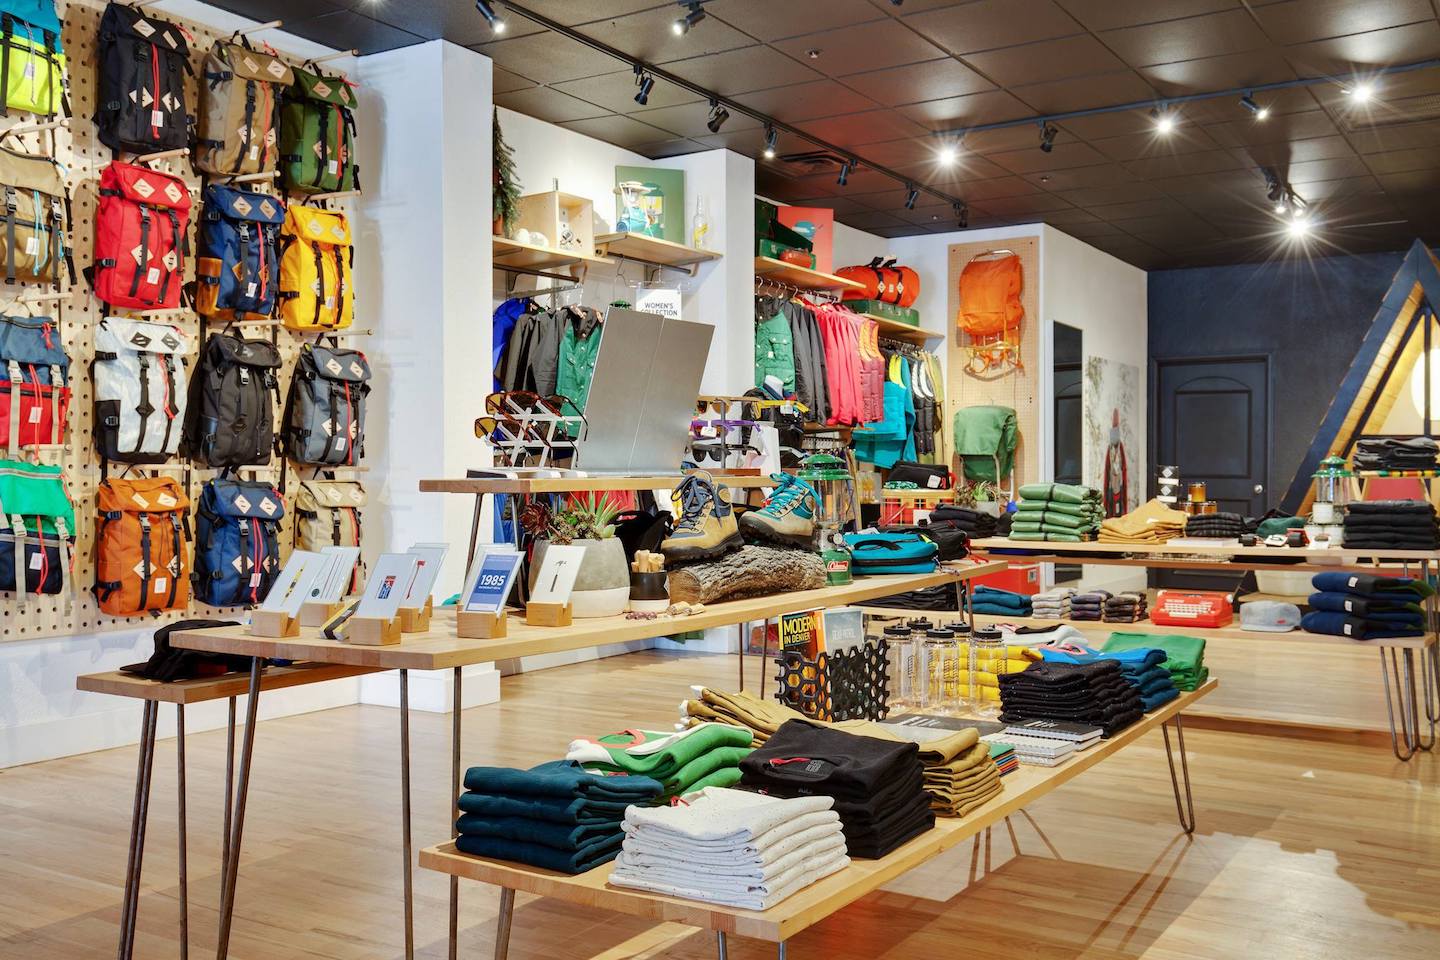 8 Outdoor Apparel Stores for Your Next Trip to the Mountains - 303 Magazine